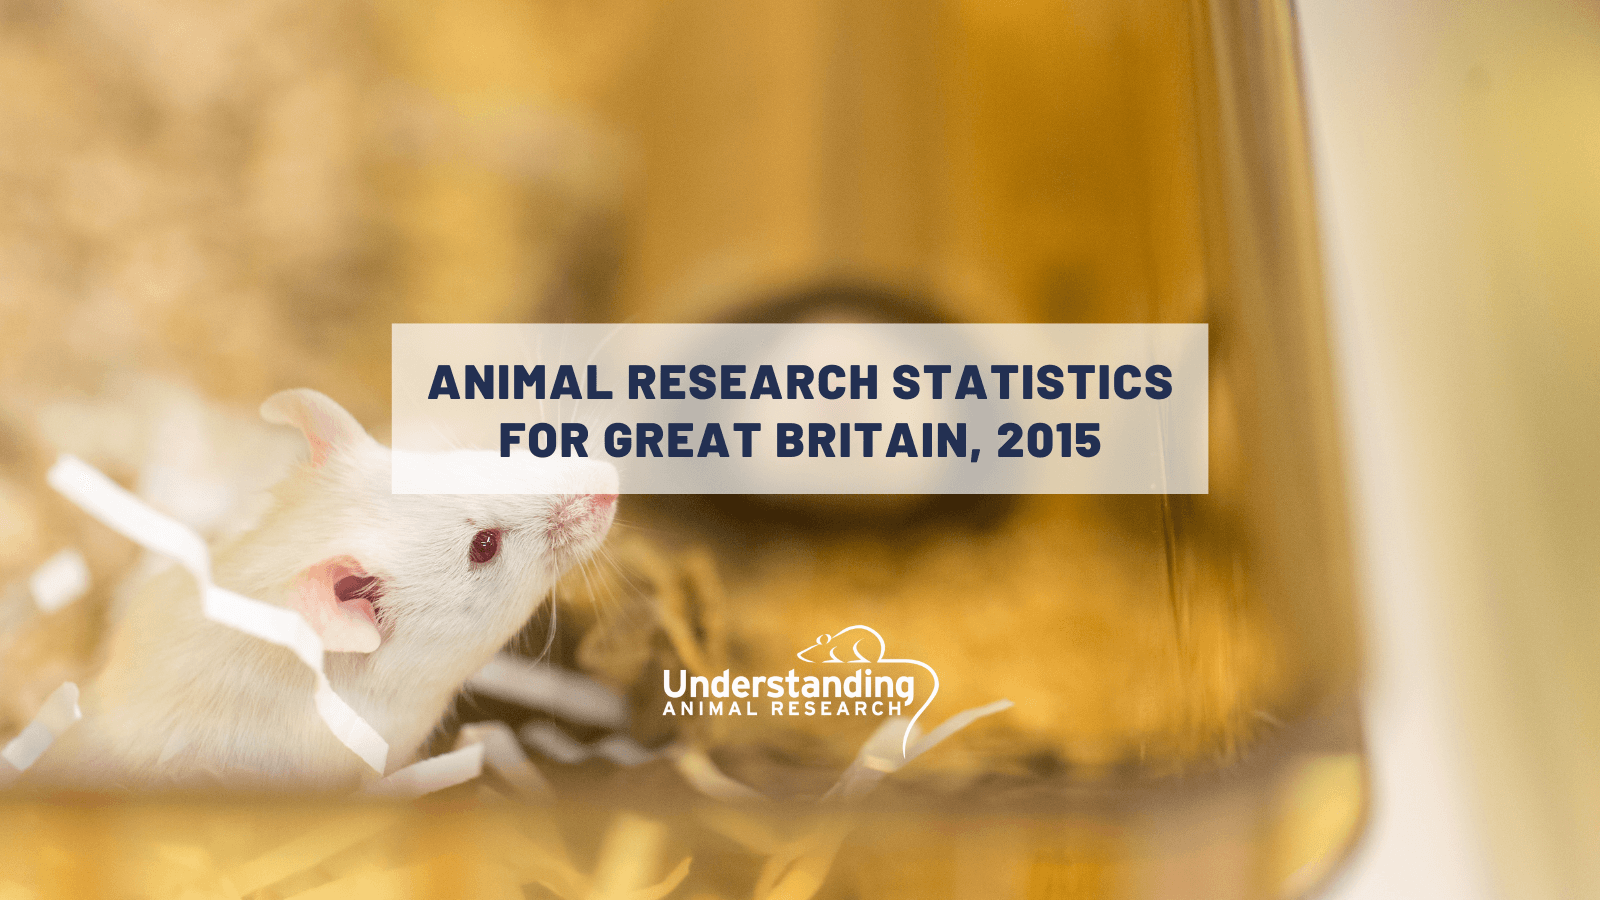 Animal research statistics for Great Britain, 2015